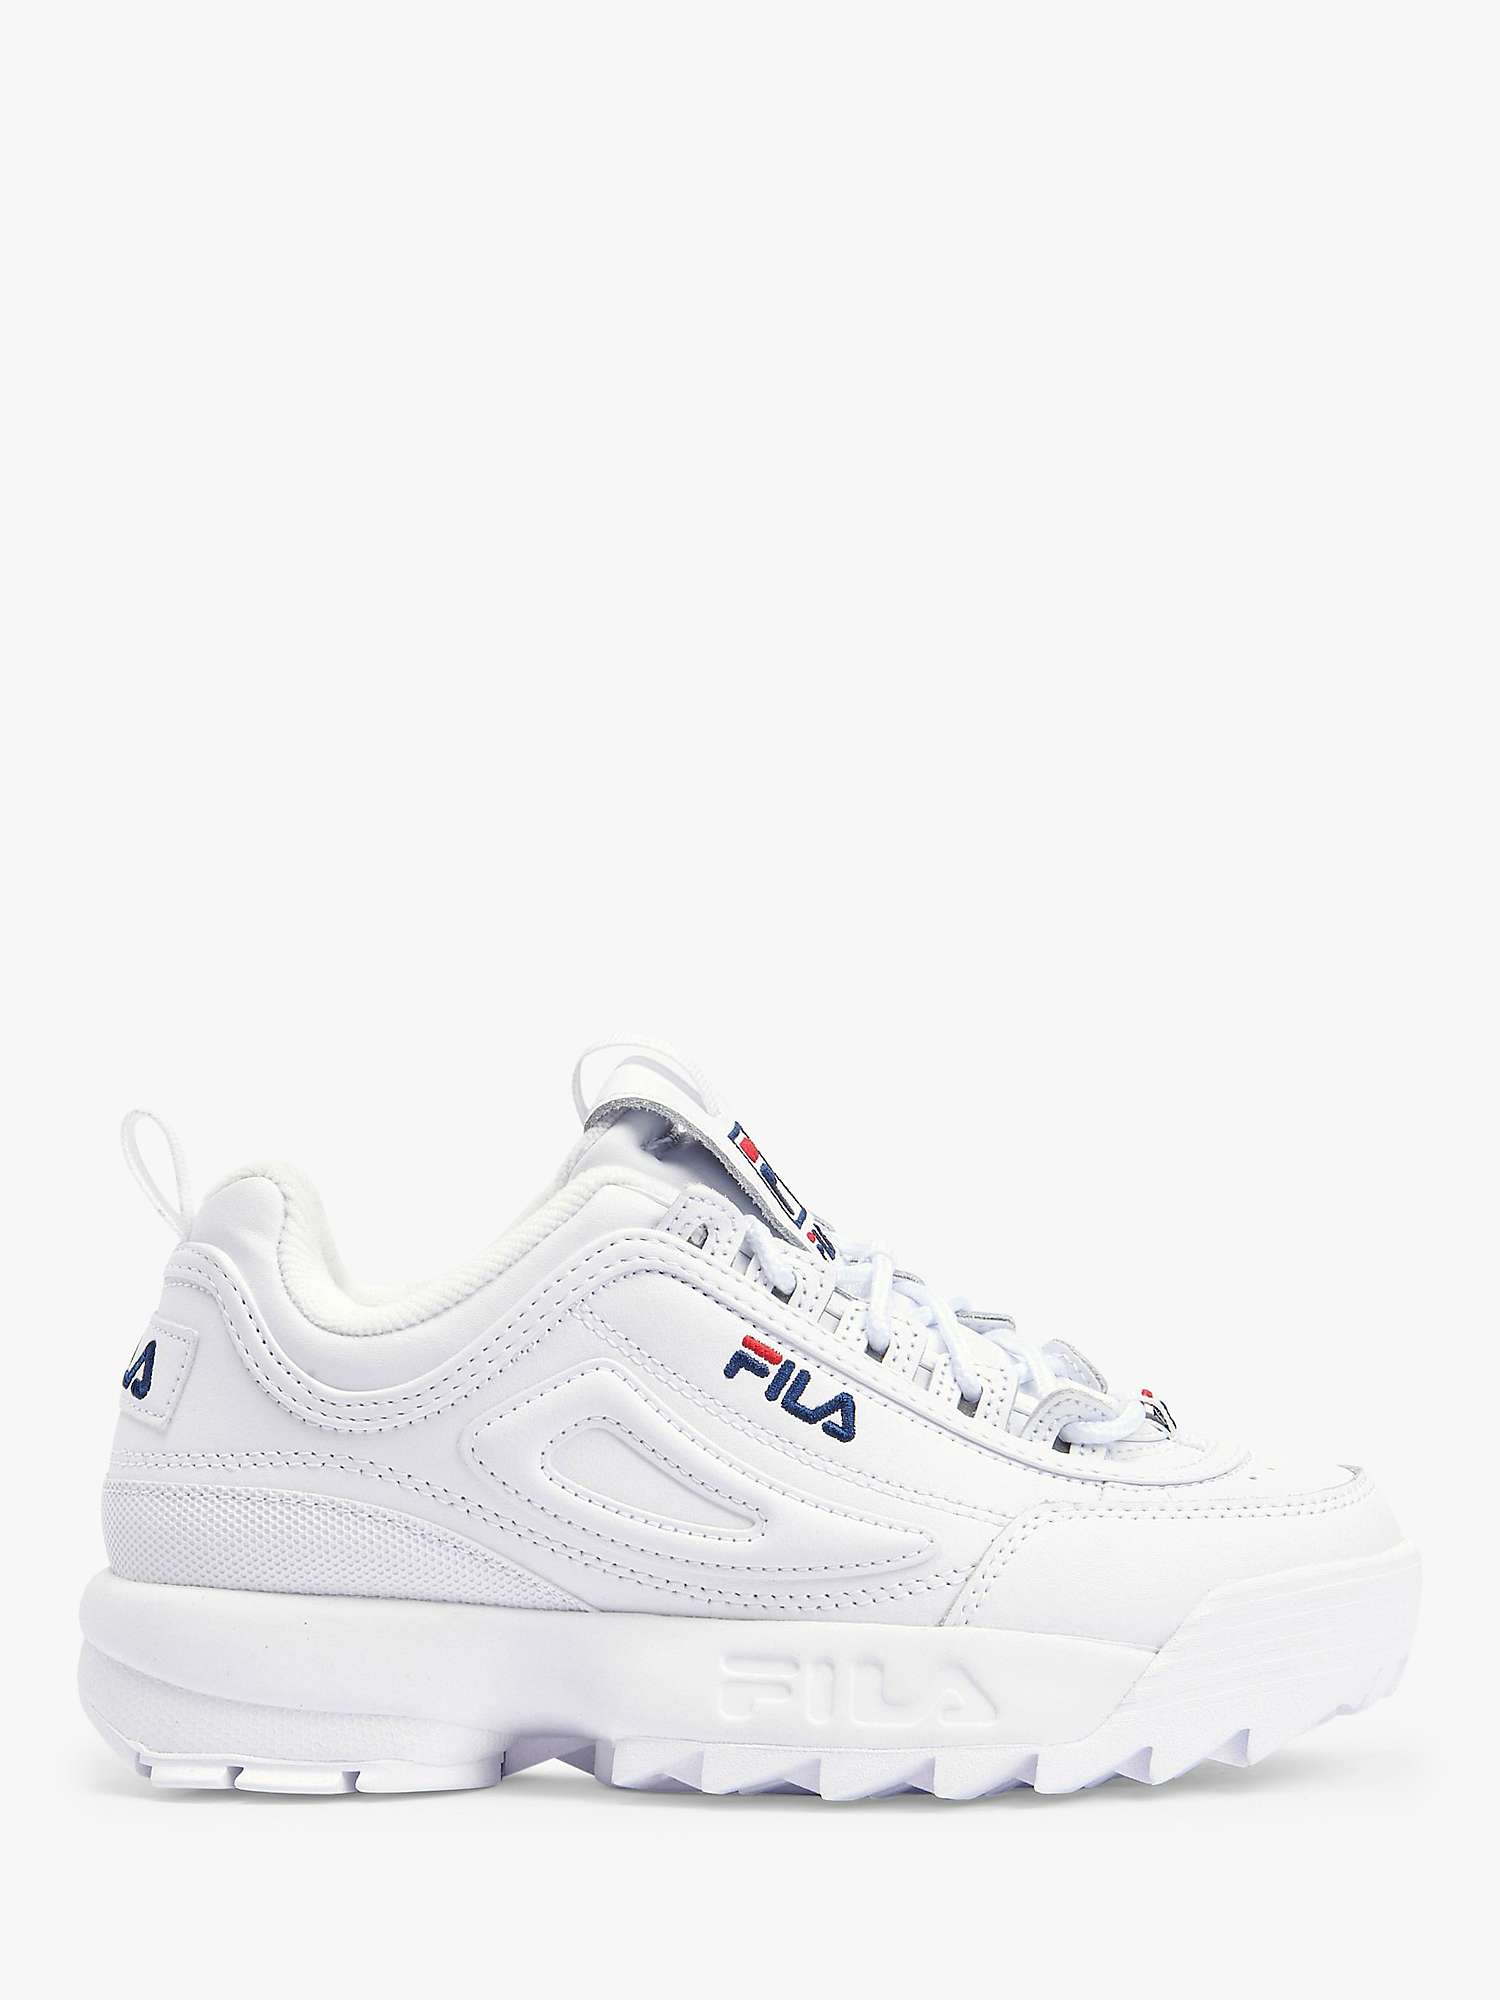 Fila Disruptor Leather Trainers, White at John Lewis & Partners